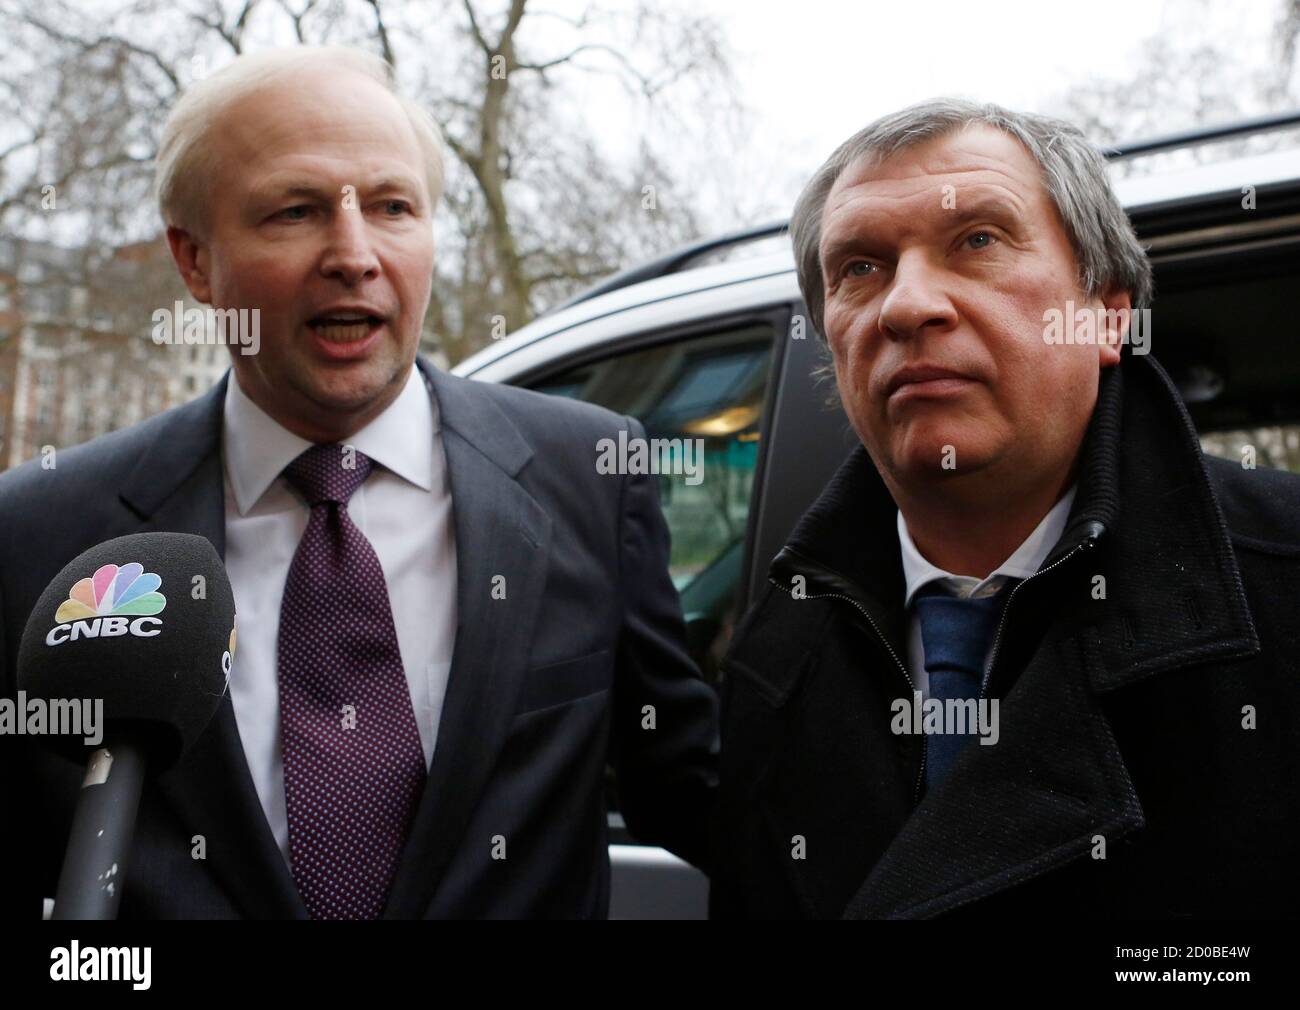 British Petroleum CEO Bob Dudley (L) and Rosneft CEO Igor Sechin speak to journalists as they arrive outside the BP headquarters in central London March 21, 2013. Russian state oil company Rosneft closed its deal to buy TNK-BP from UK-based BP and four tycoons on Thursday, releasing $40 billion cash to the sellers and becoming a bigger oil producer than Exxon Mobil. The $55 billion deal, which also gives BP a near 20 percent stake in Rosneft, was announced last year after months of on-off negotiations. It is the biggest in Russia's corporate history.. REUTERS/Olivia Harris (BRITAIN - Tags: BUS Stock Photo